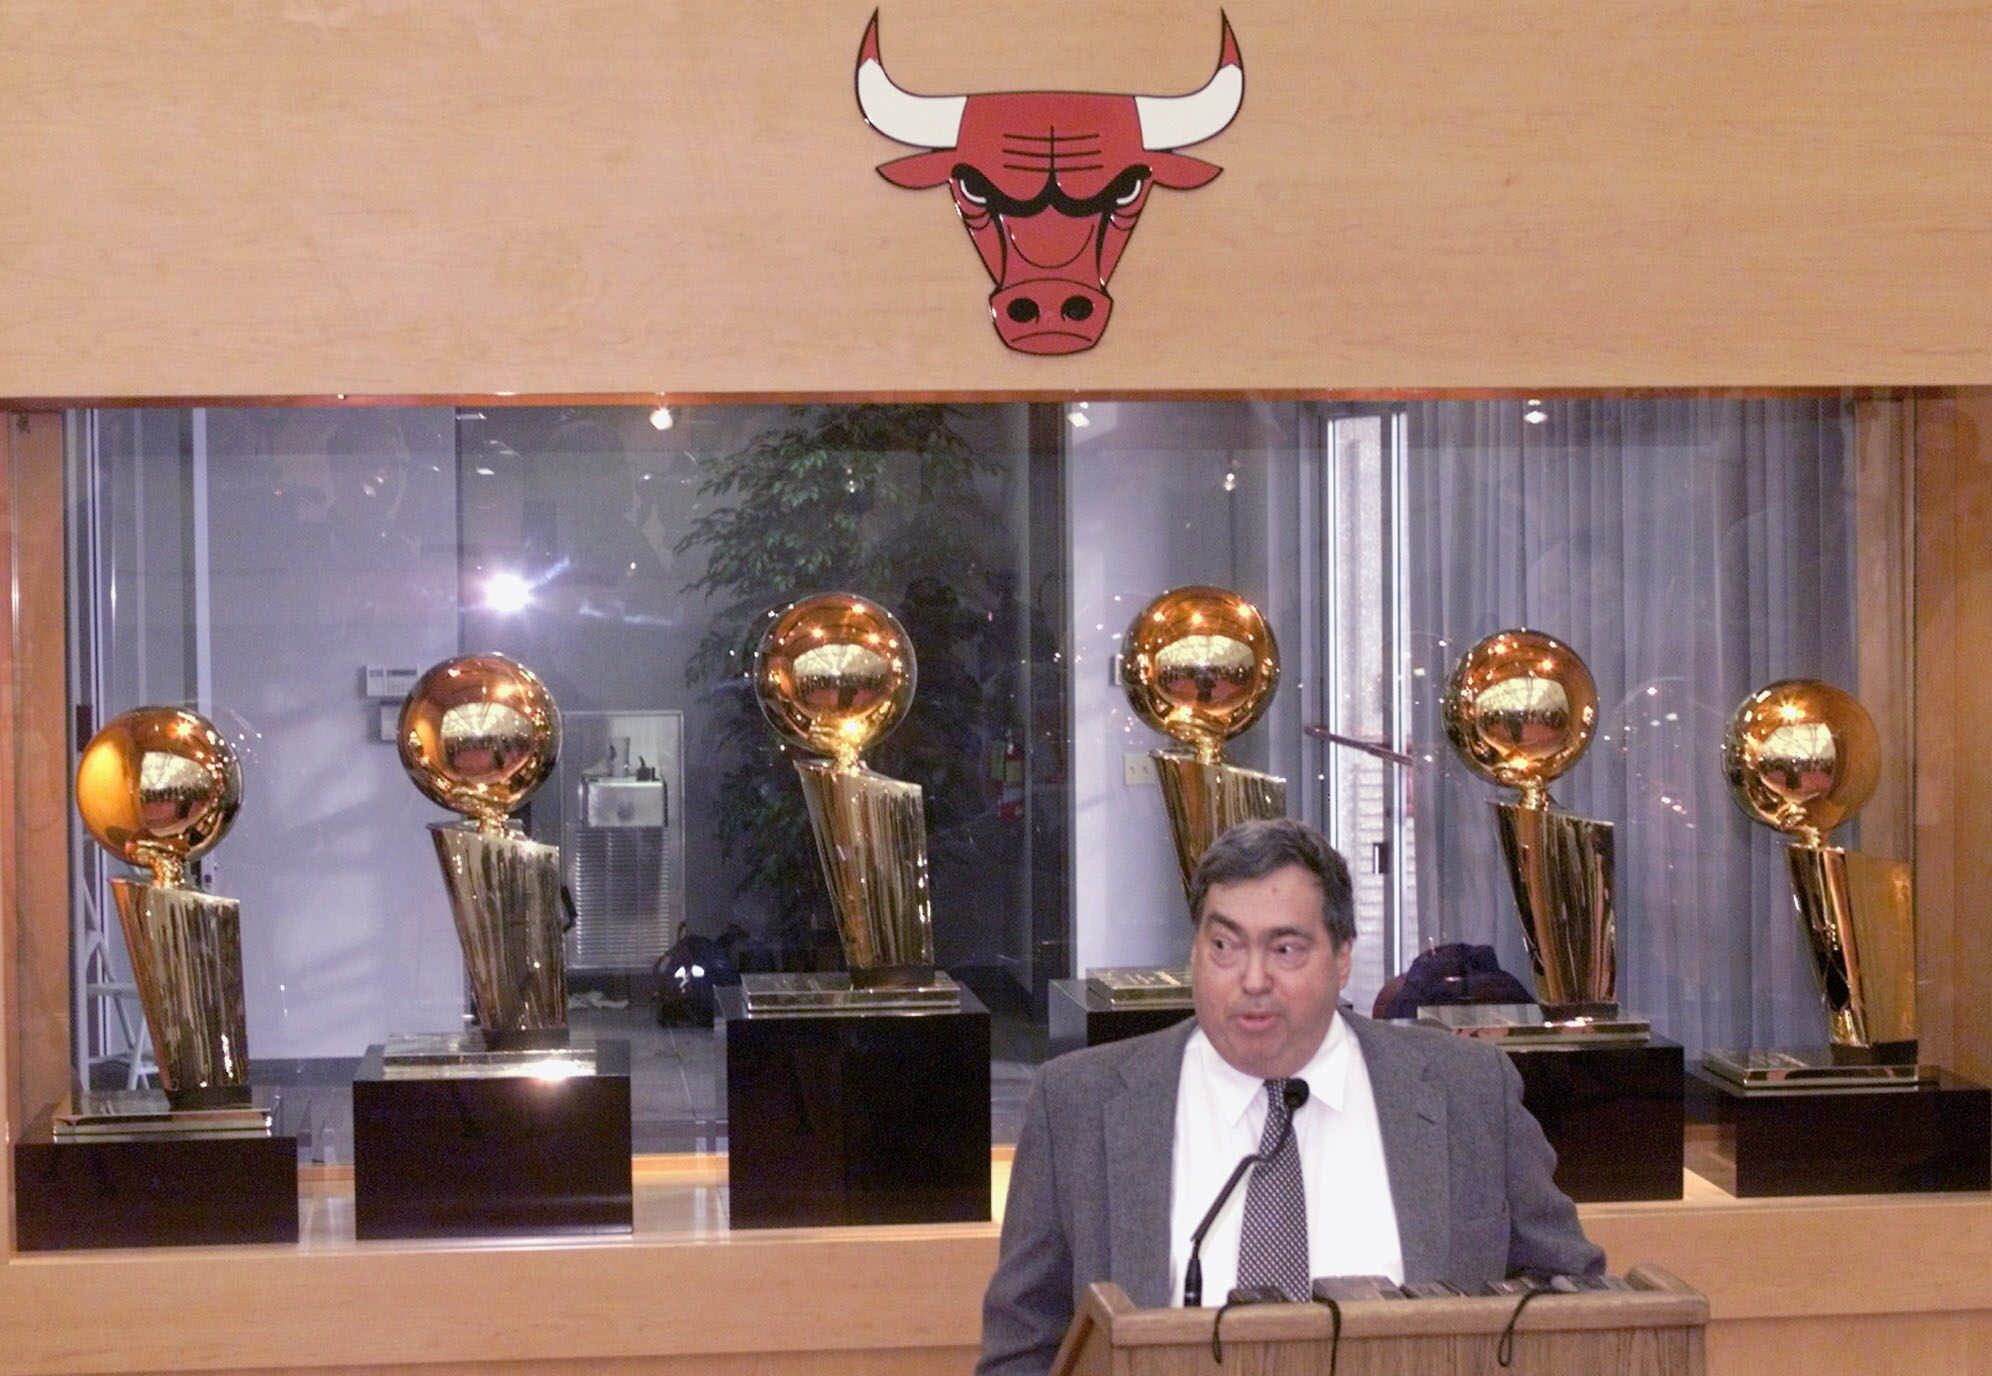 I Knew Jerry Krause The Last Dance Michael Jordan Co Have Done Him Dirty Cleveland Com